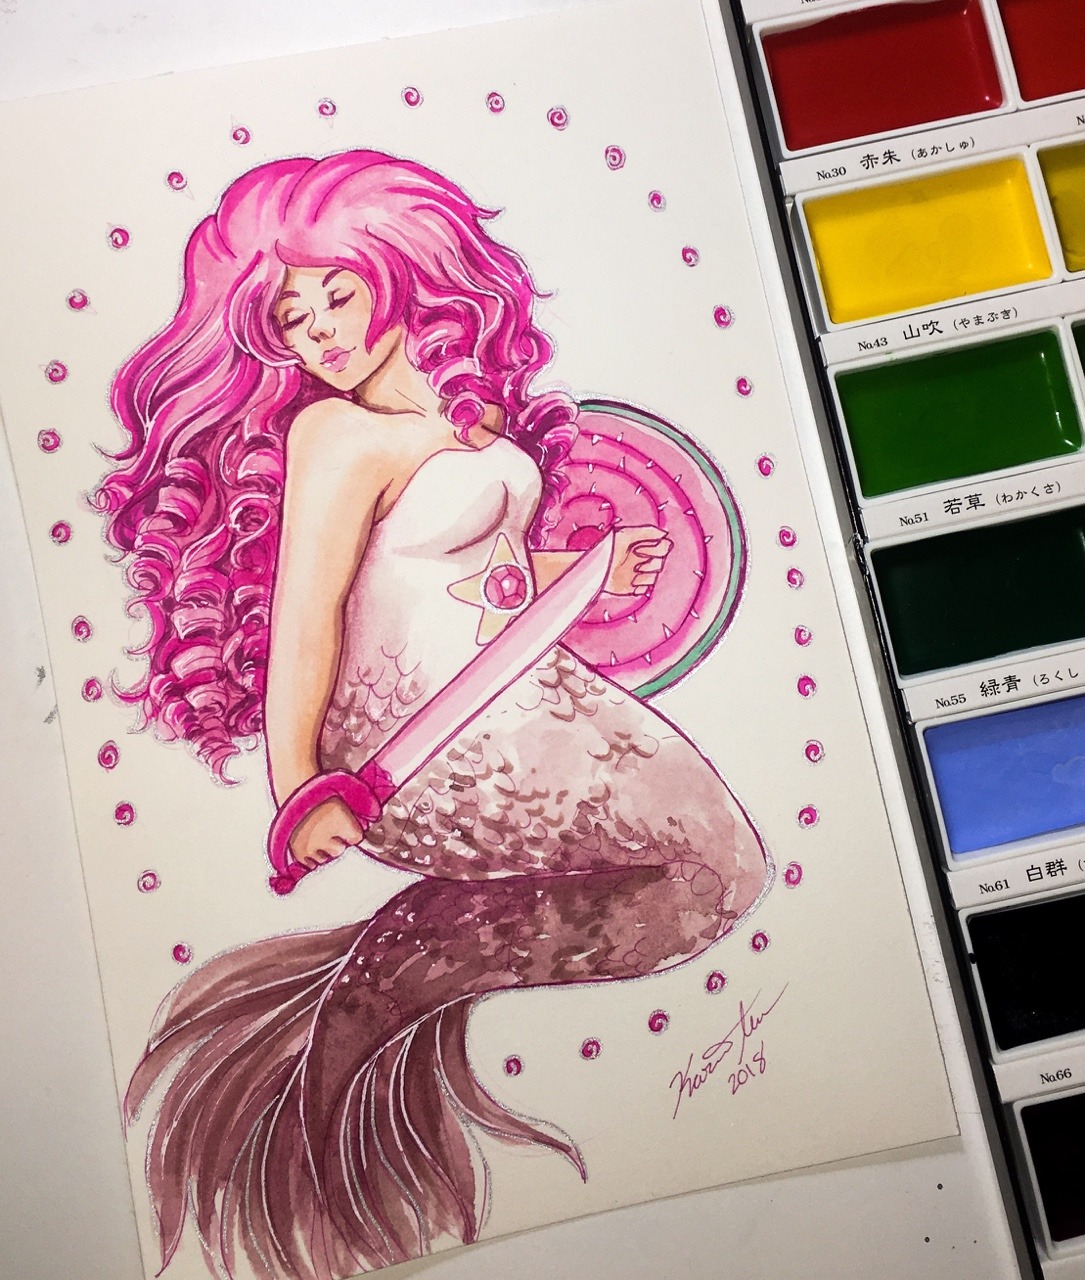 Happy MerMay! This is Day one! I made my own theme this month: Gem Mermaids! And of course half of the month will be Steven Universe! 😆